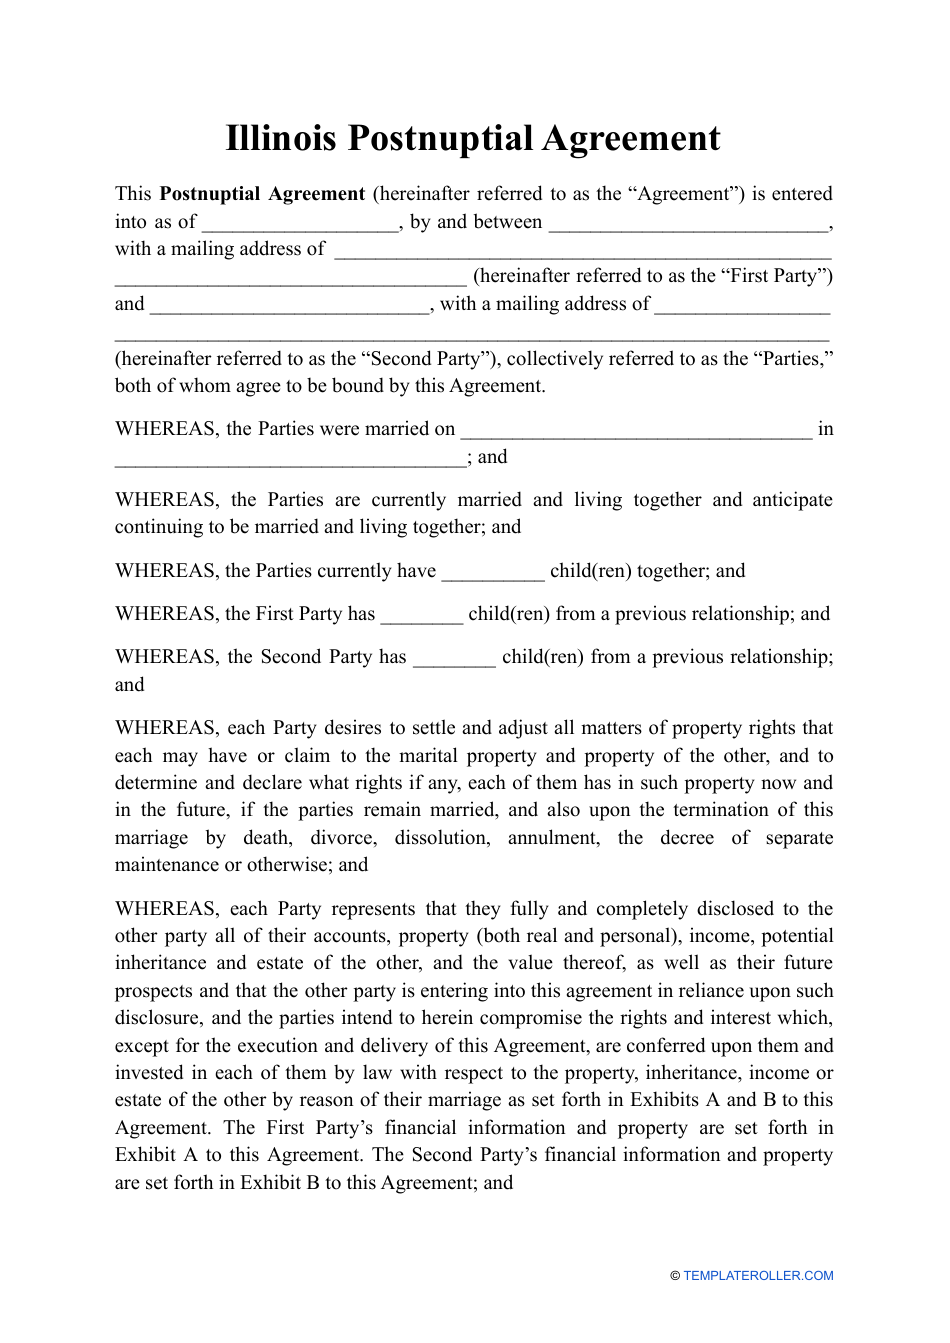 Postnuptial Agreement Template - Illinois, Page 1